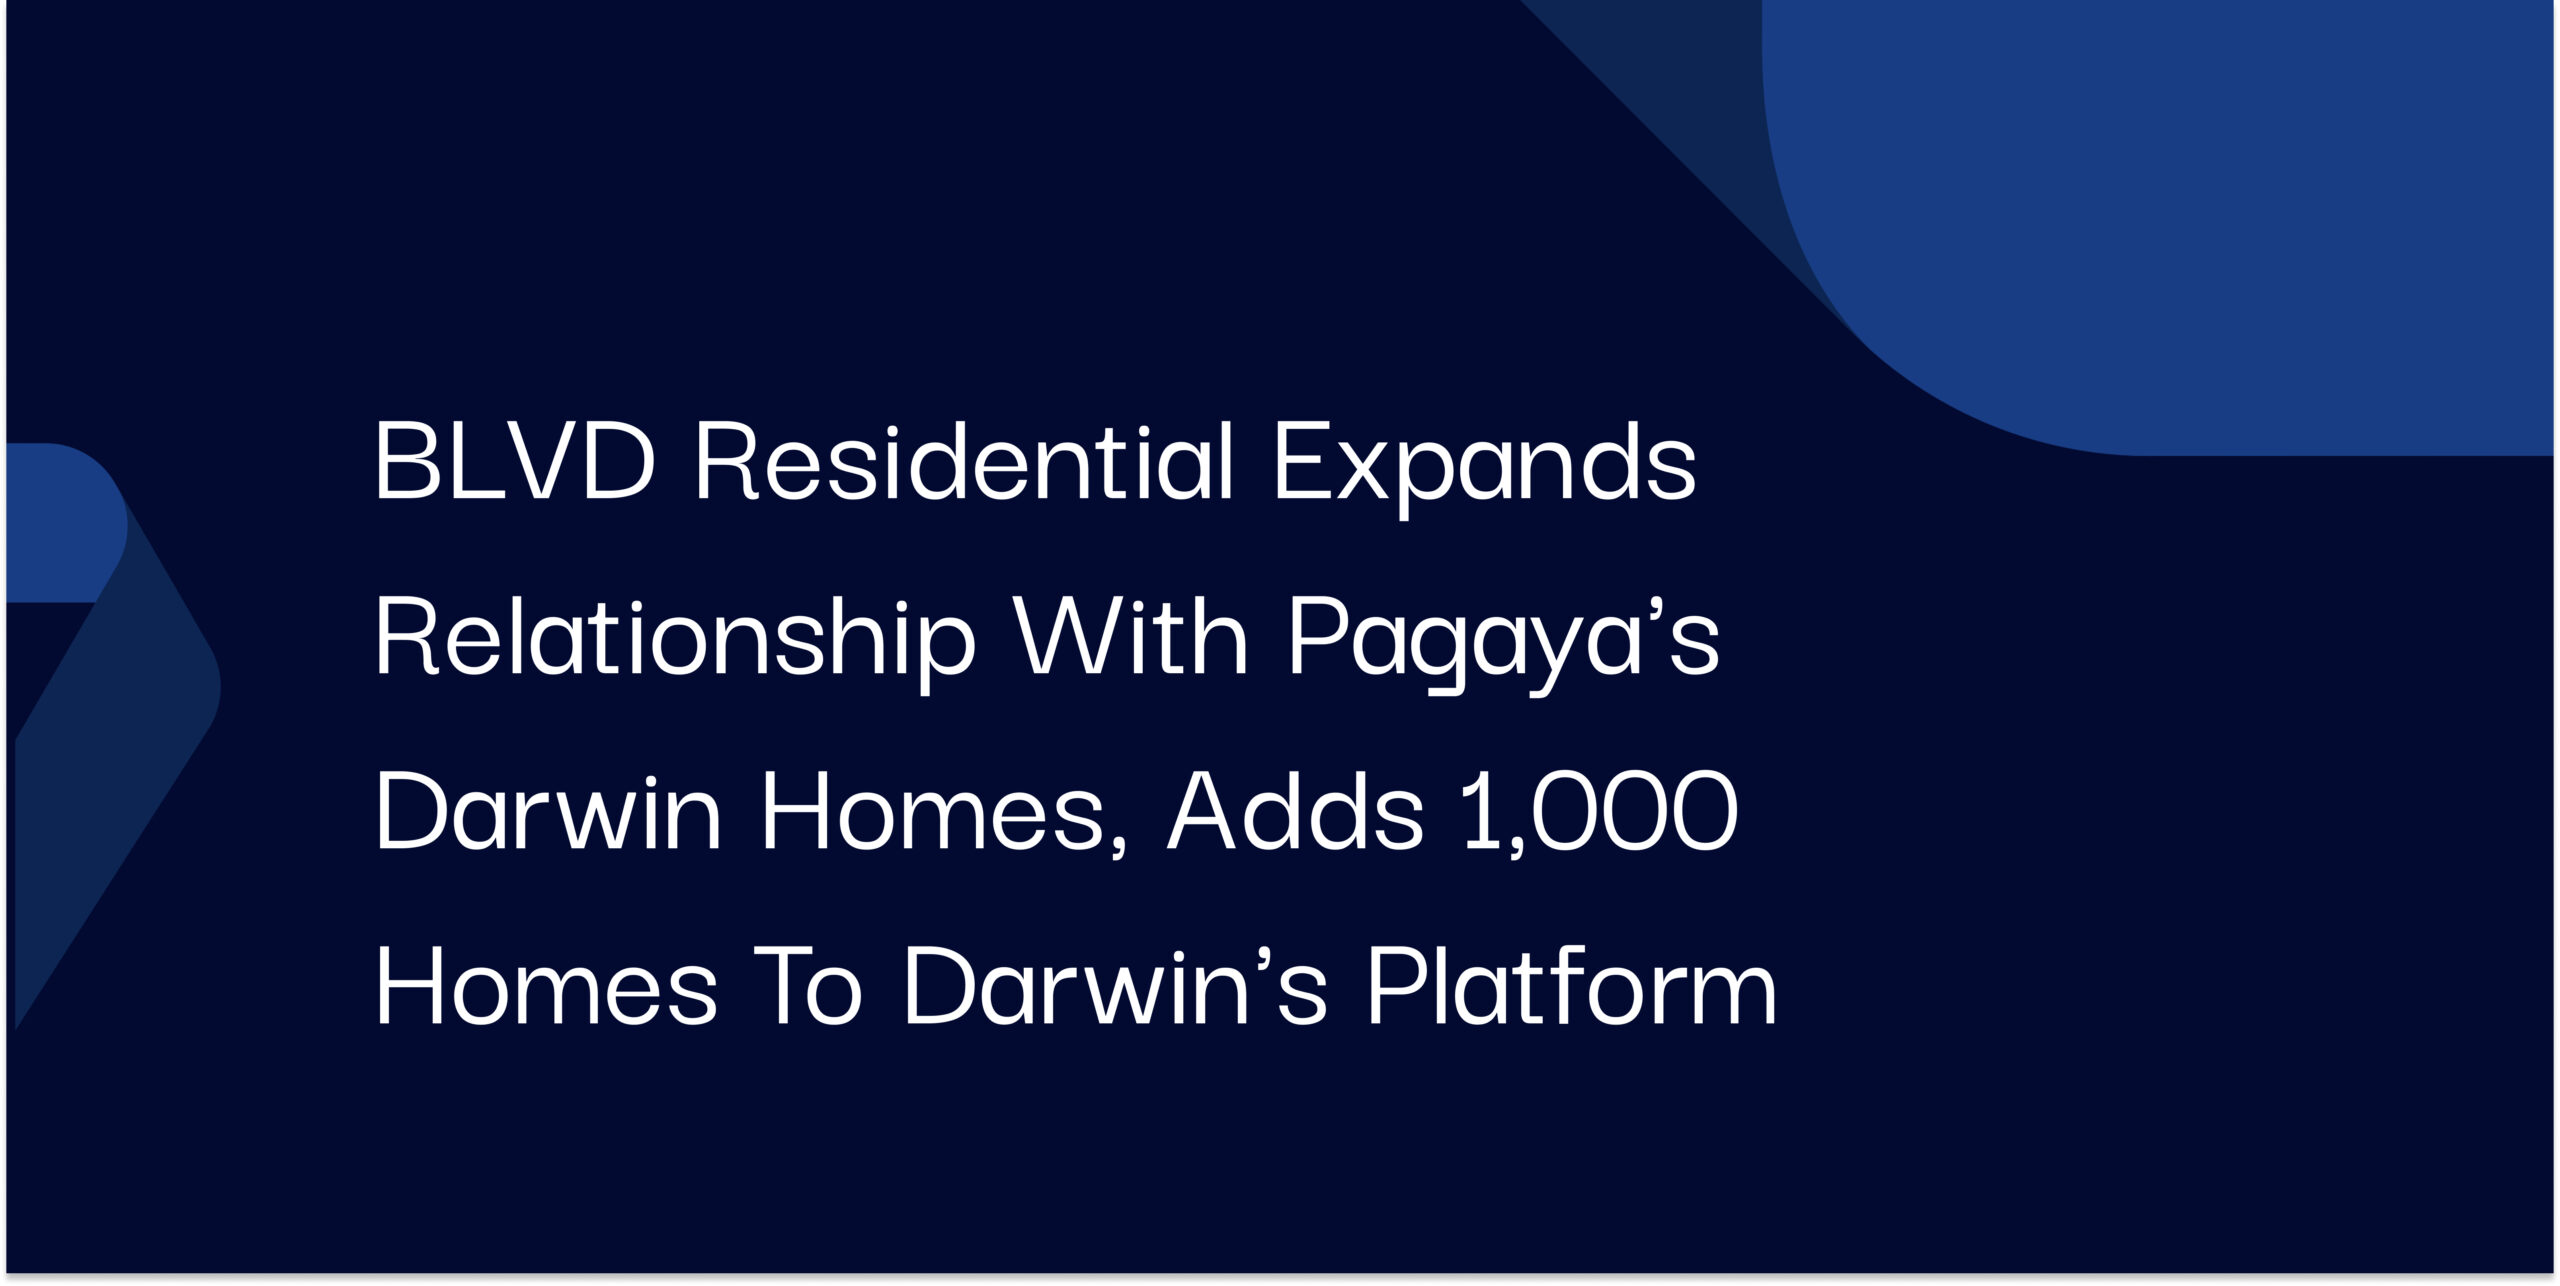 BLVD Residential Expands Relationship with Pagaya's Darwin Homes, Adds 1,000 Homes to Darwin's Platform